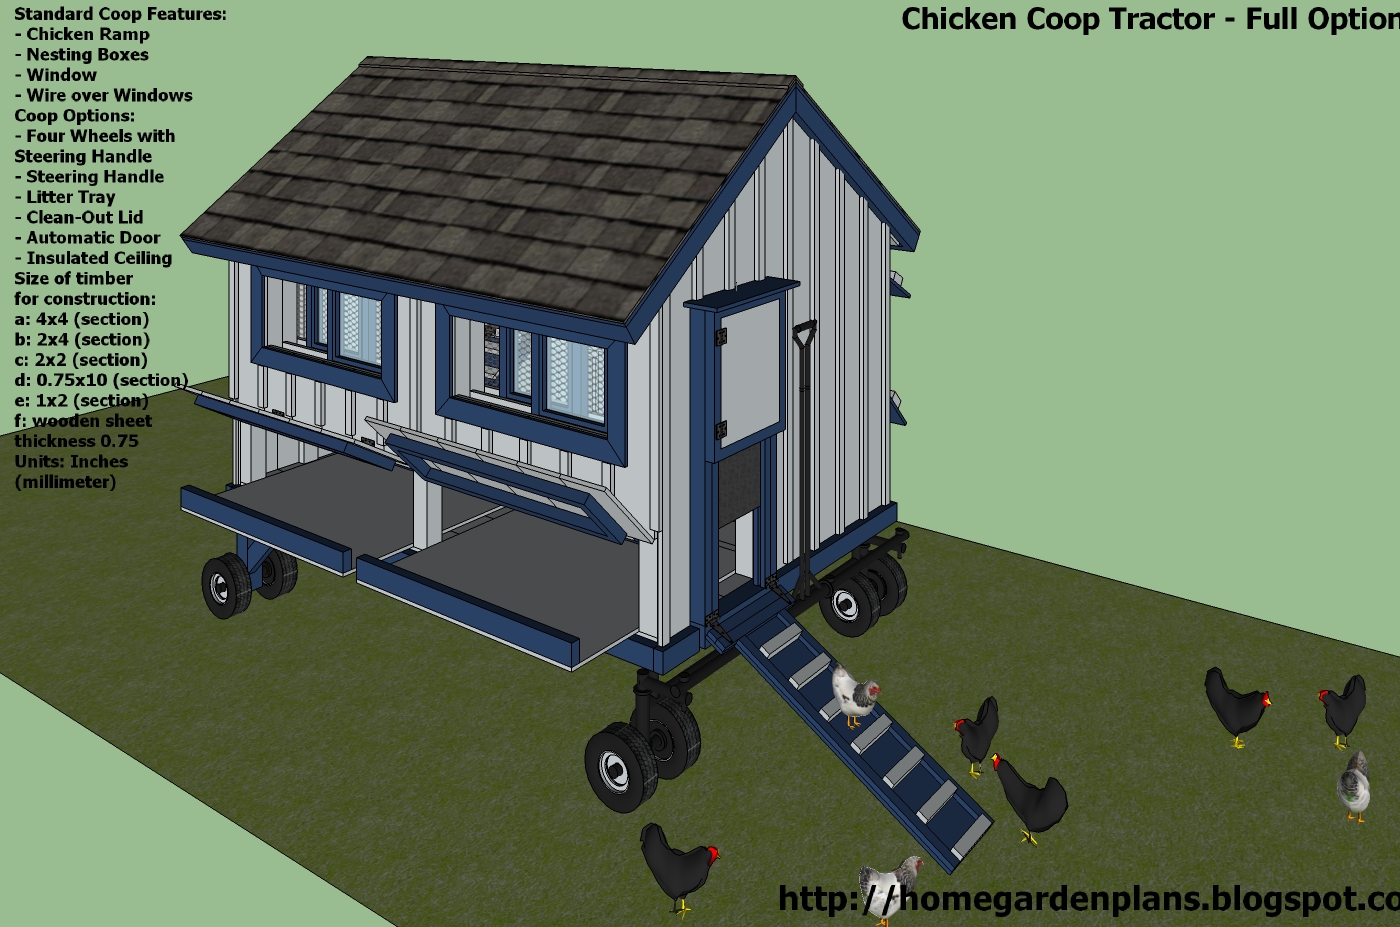  - Free Chicken Coop Tractor Plans - How to build a Chicken Coop